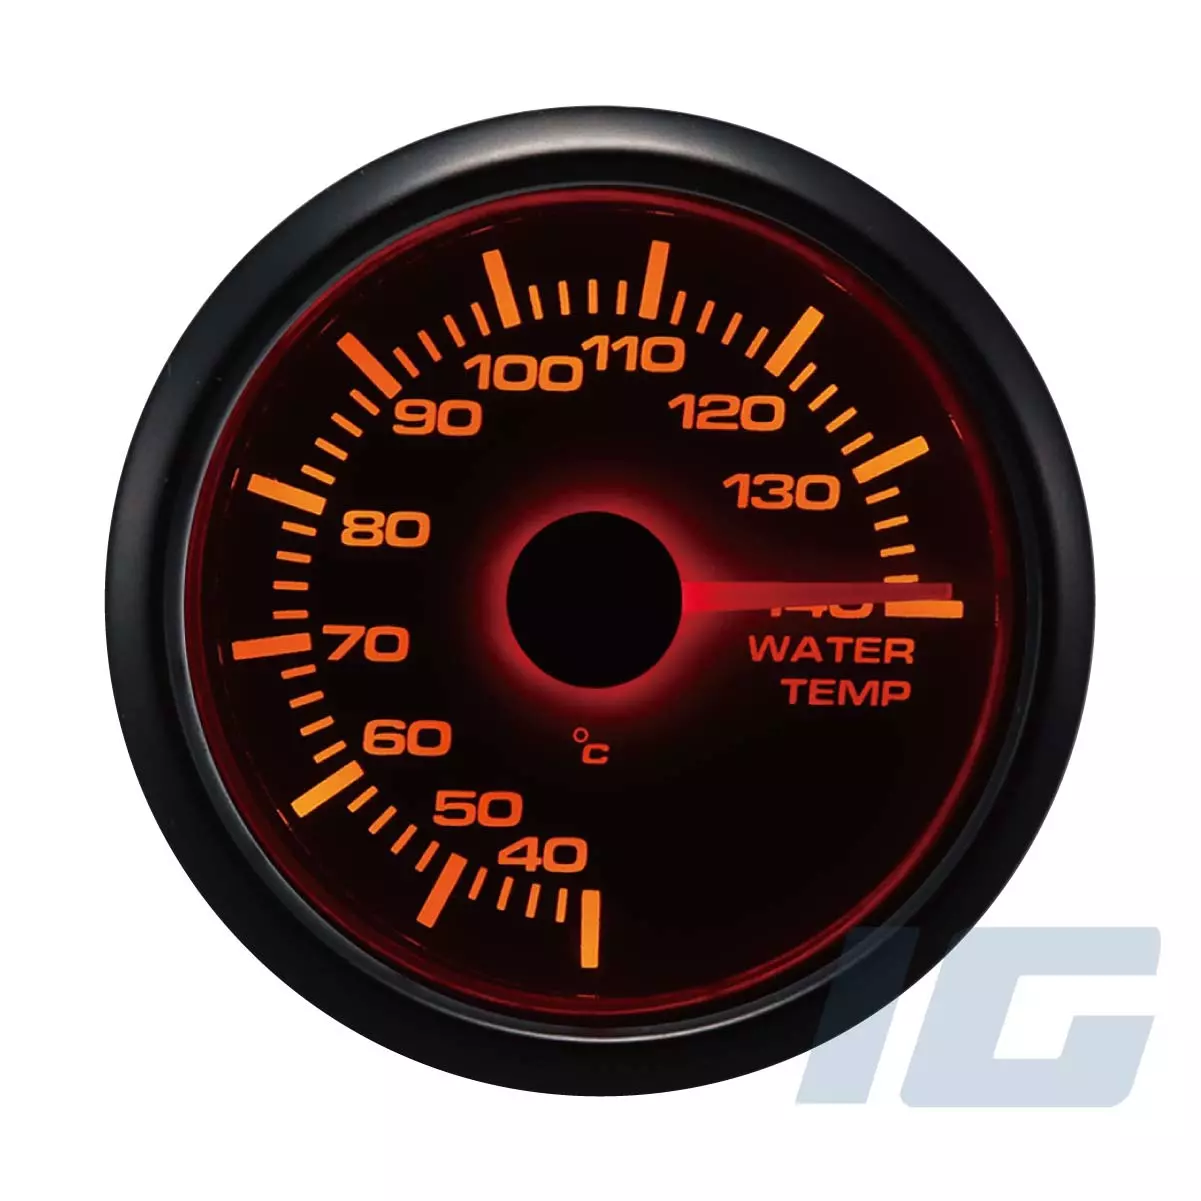 igauge, MGS Series, 52mm, Black Face, Aftermarket, Marine, Gauge, Boat, Outboard, Water Temperature, kit